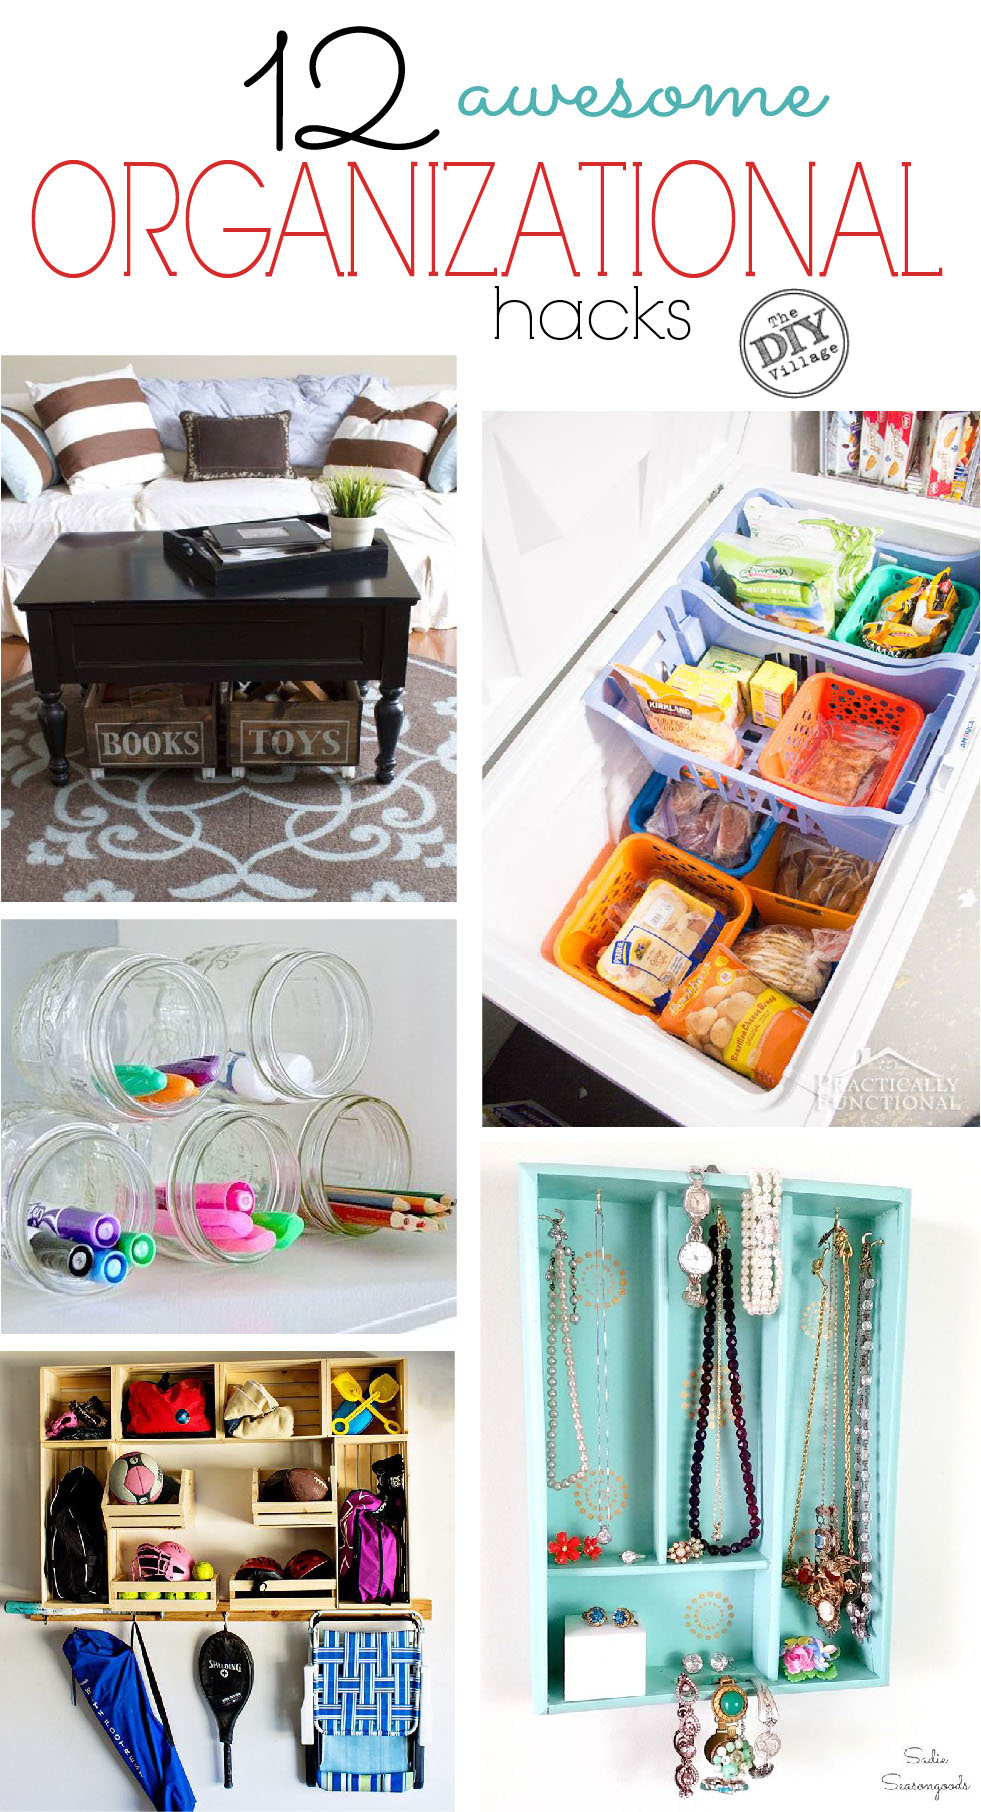 12 awesome organization hacks for every home!